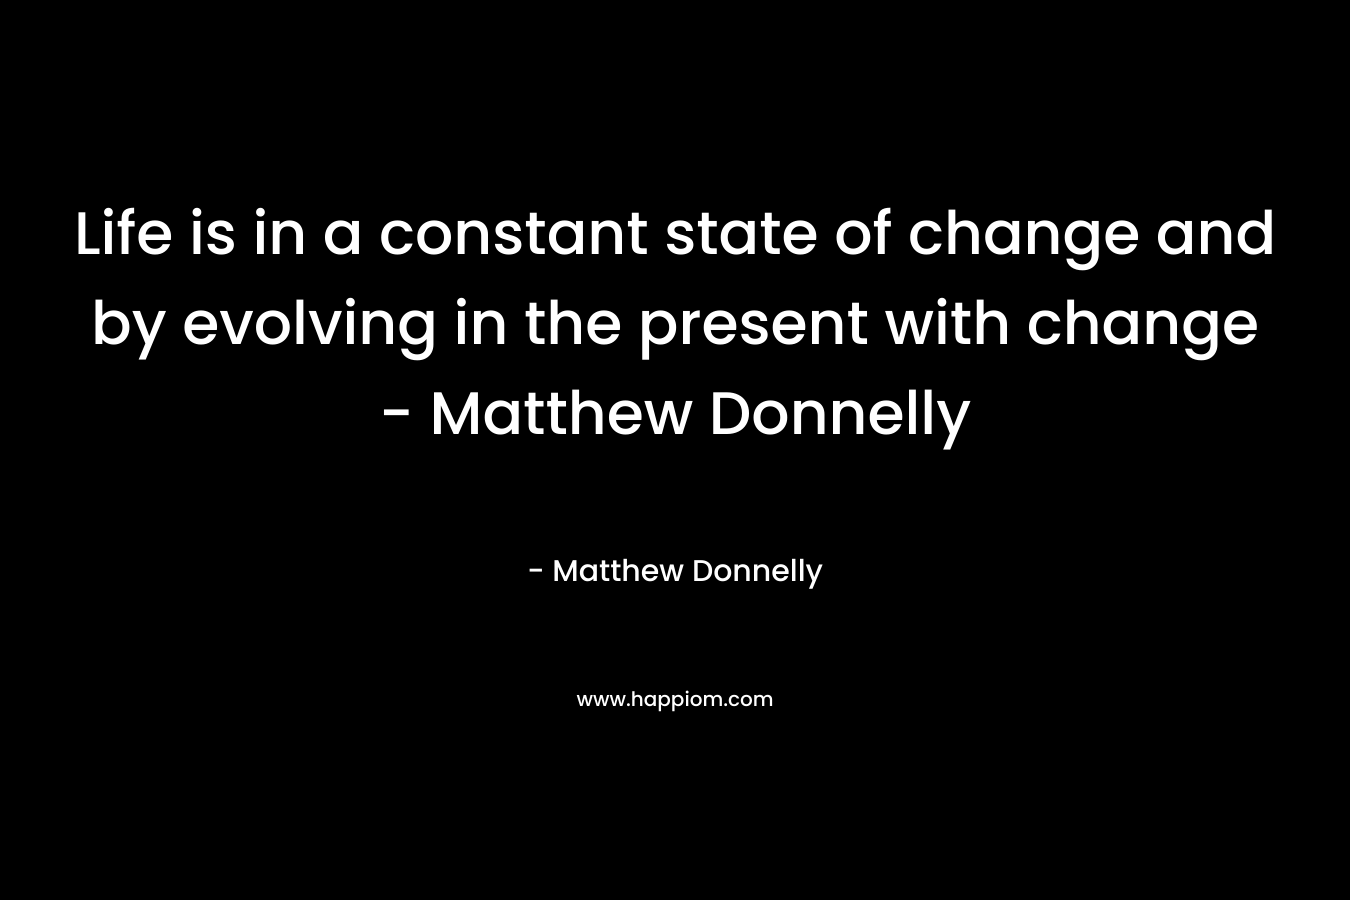 Life is in a constant state of change and by evolving in the present with change - Matthew Donnelly